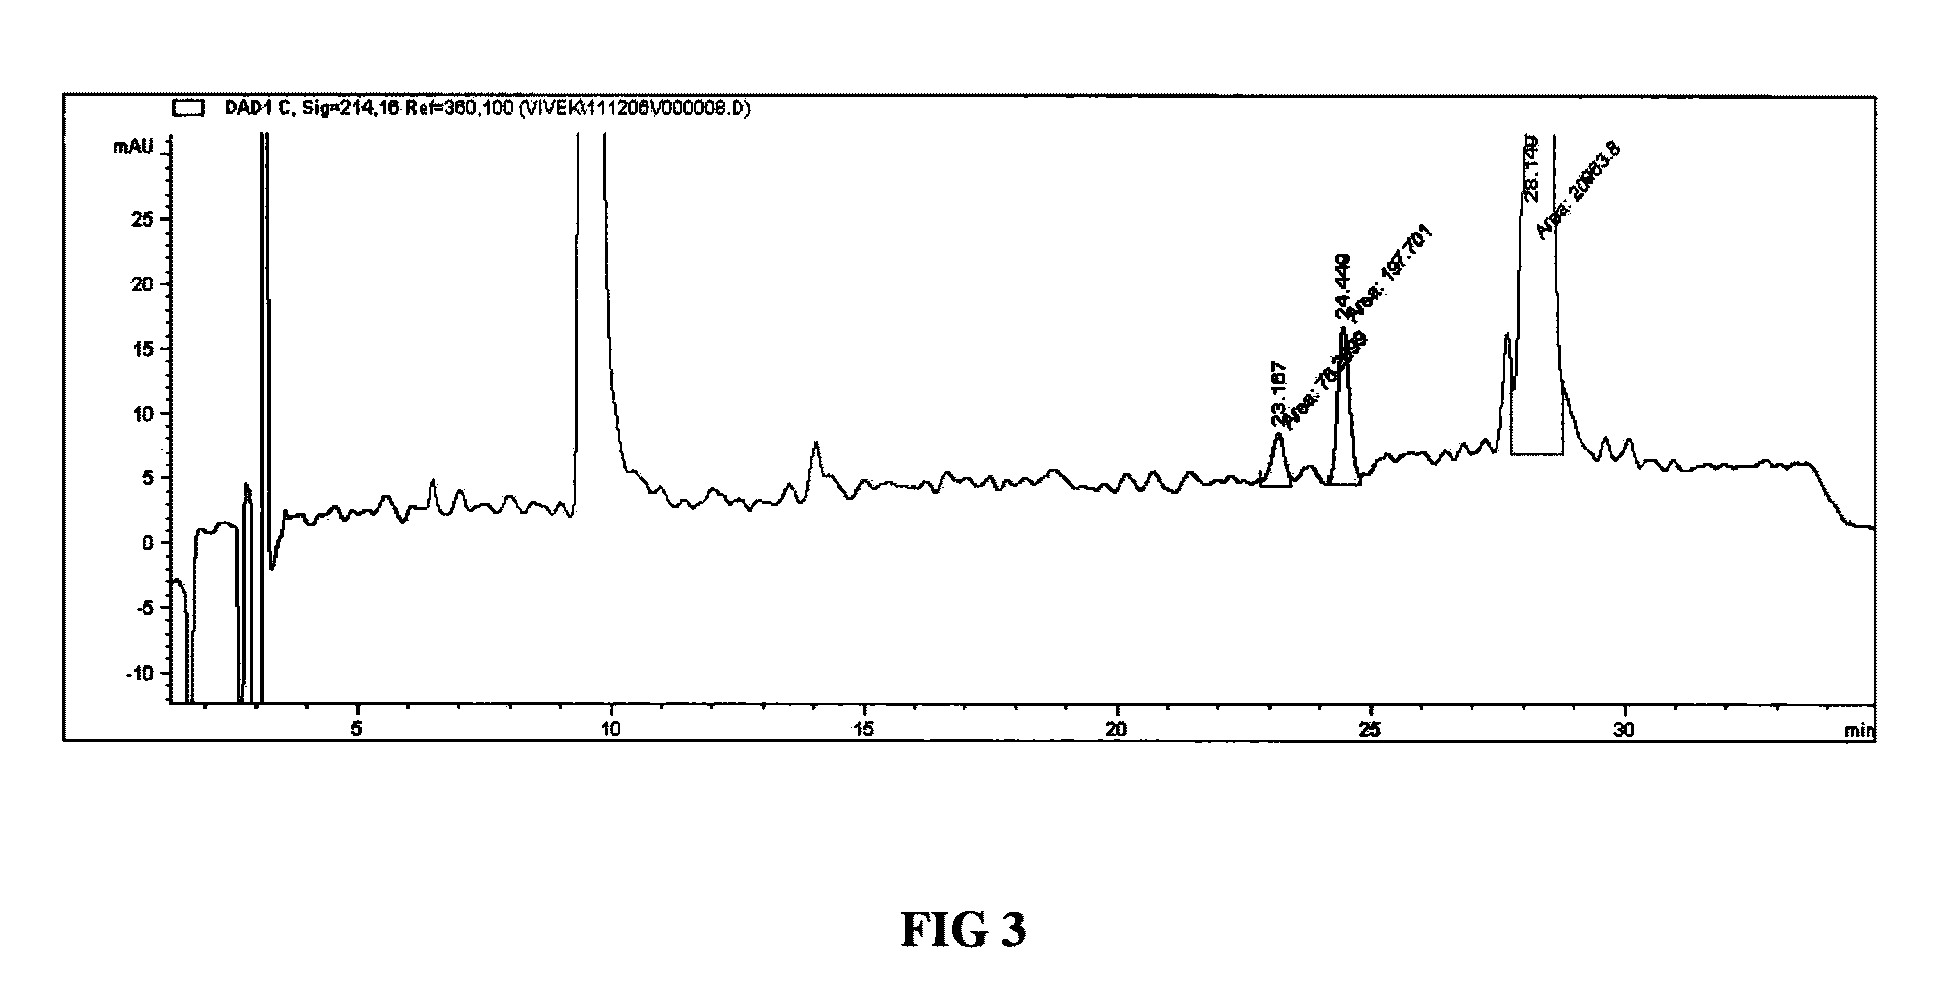 Method of obtaining a purified, biologically active heterologous protein